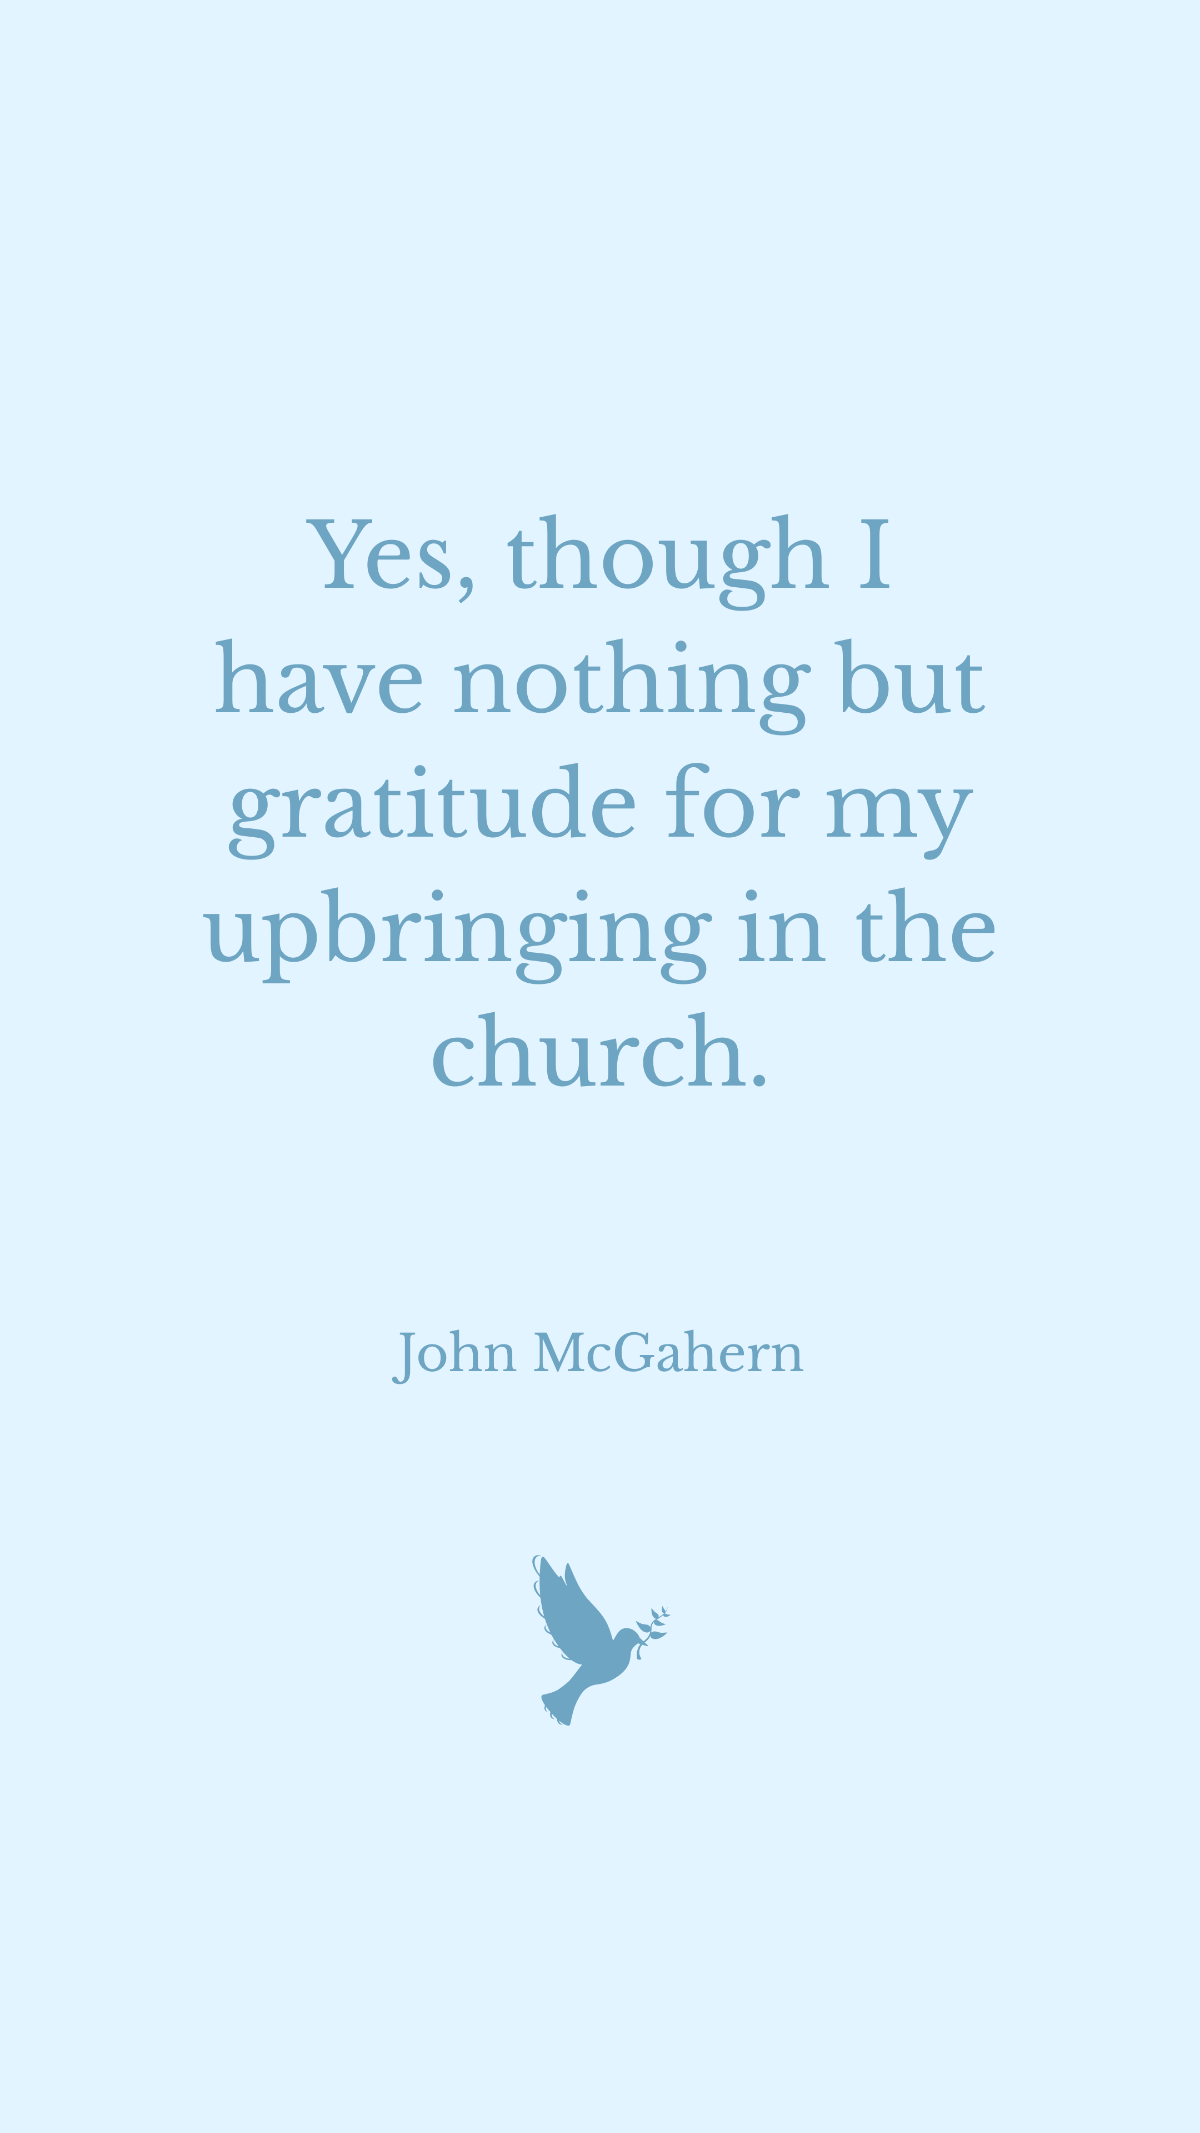 John McGahern - Yes, though I have nothing but gratitude for my upbringing in the church. Template